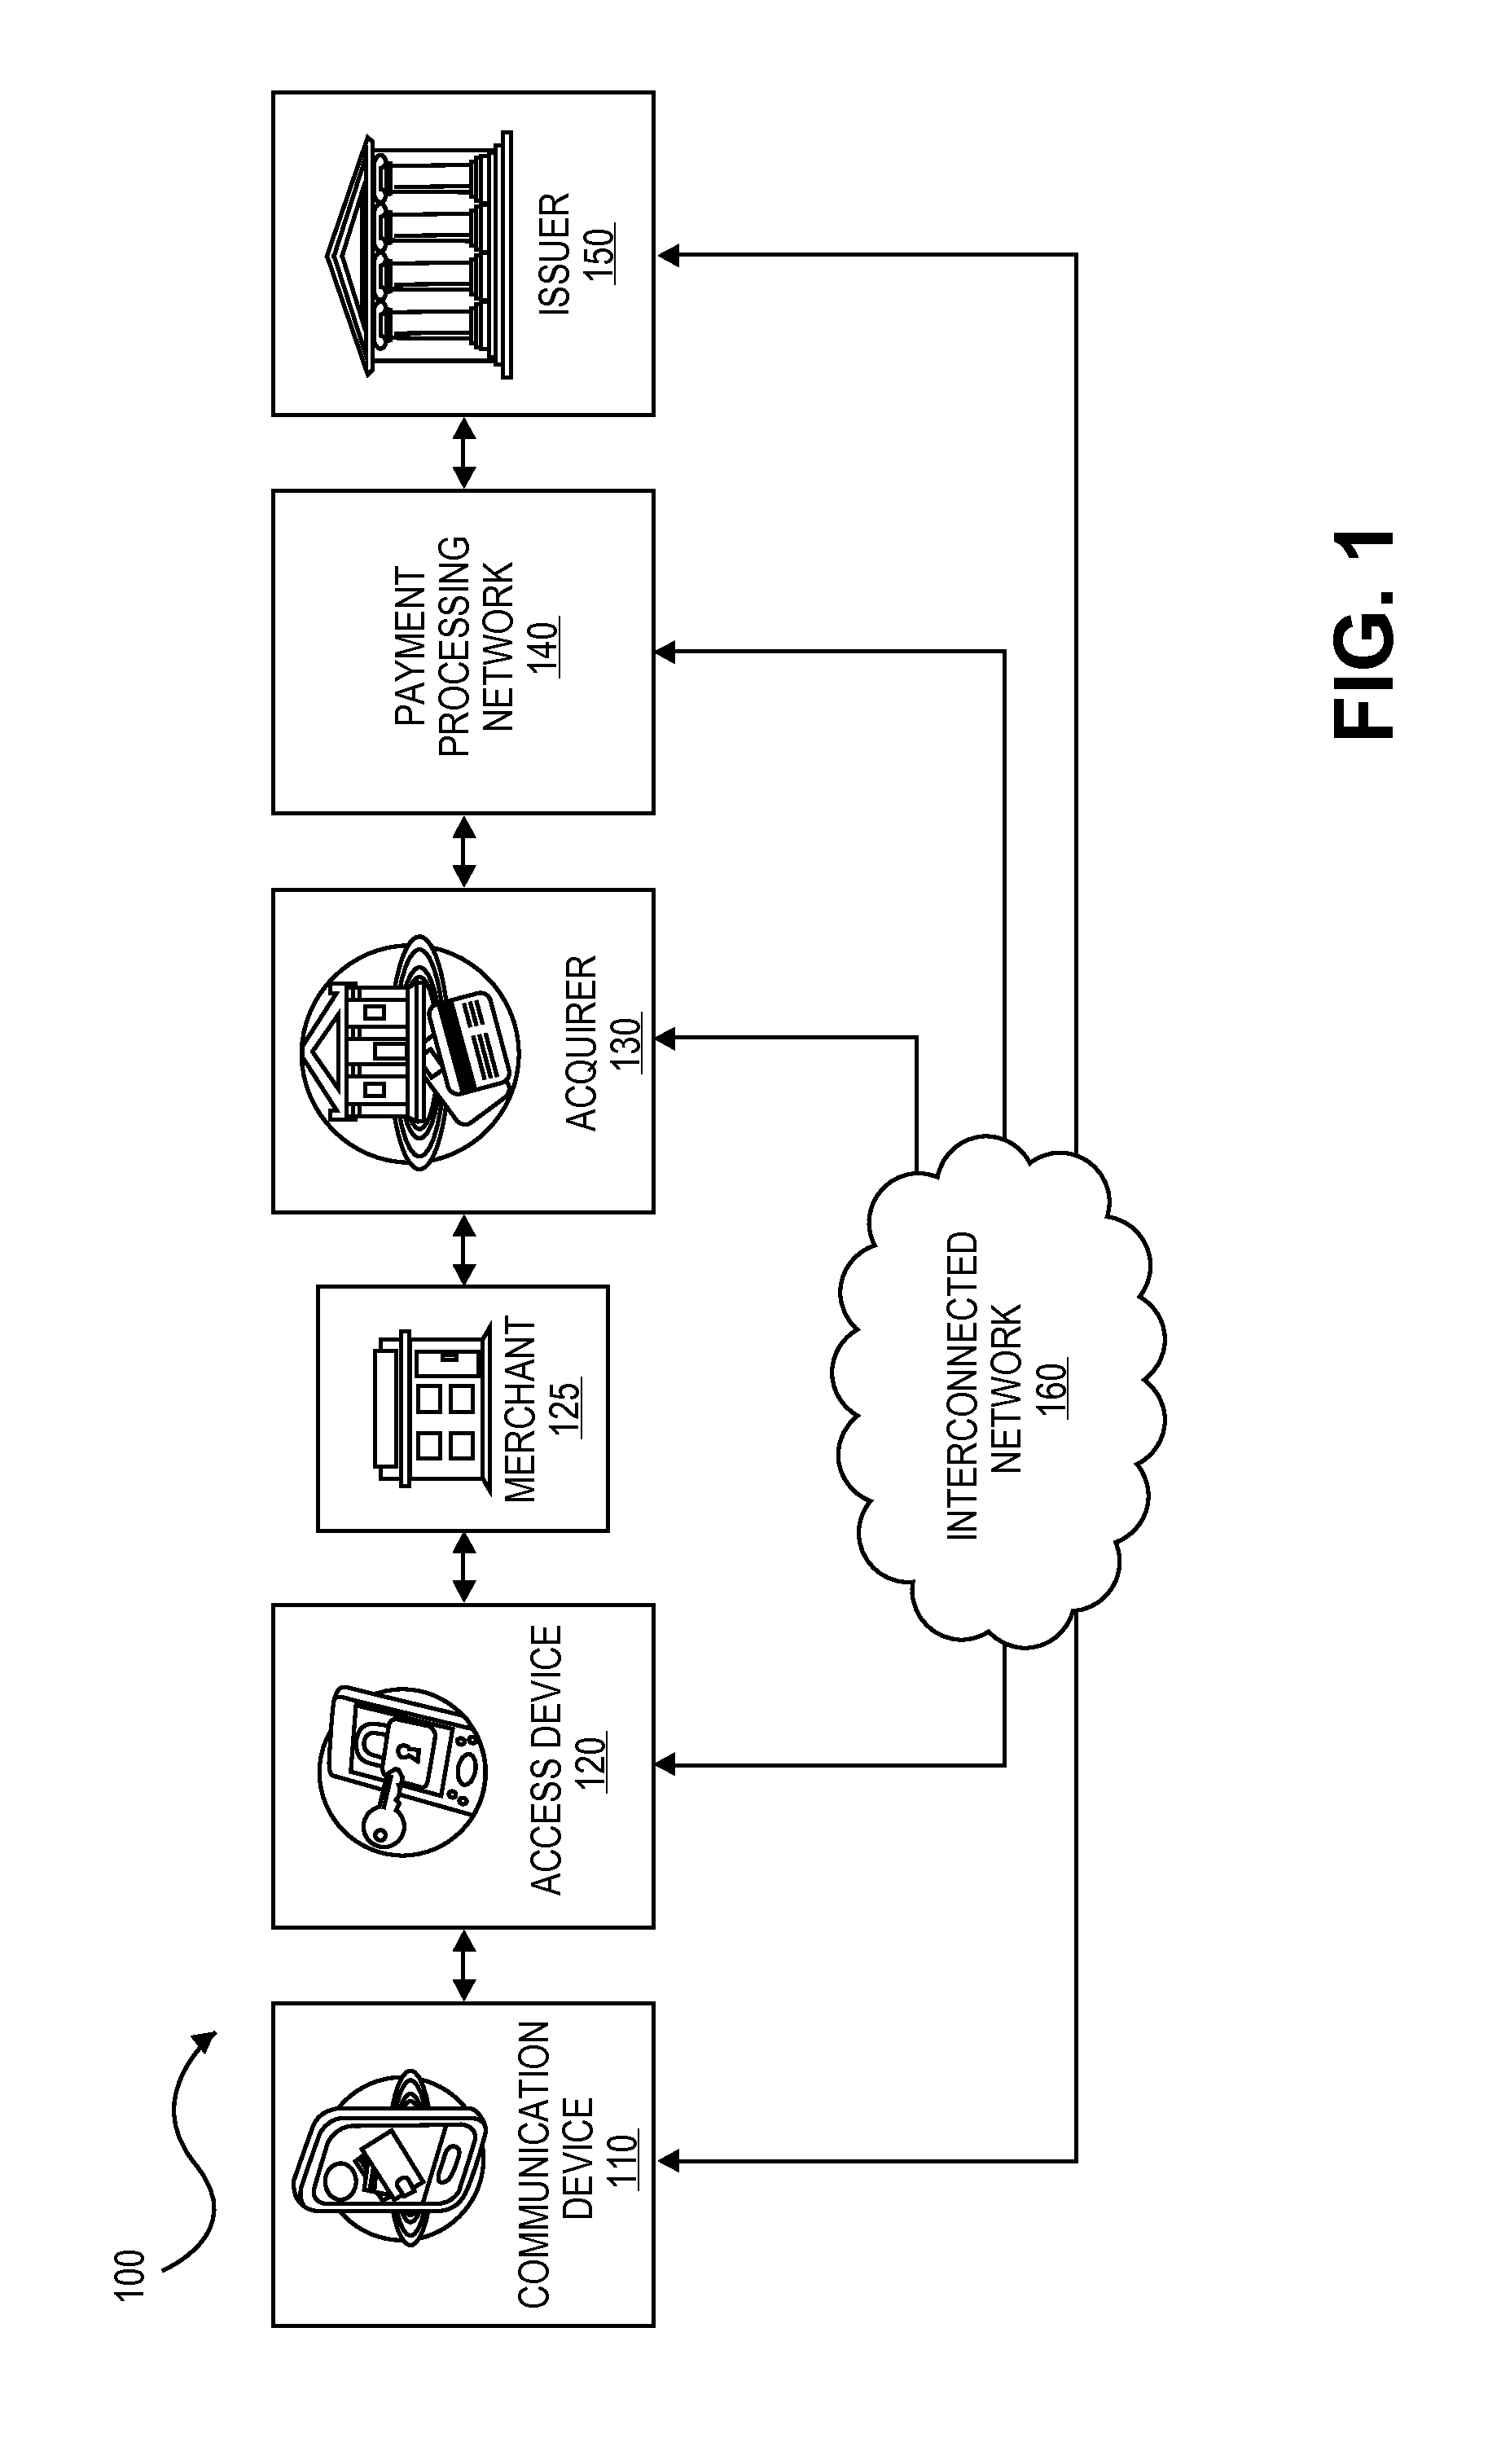 System and method for automatically enrollng an item in a virtual wallet